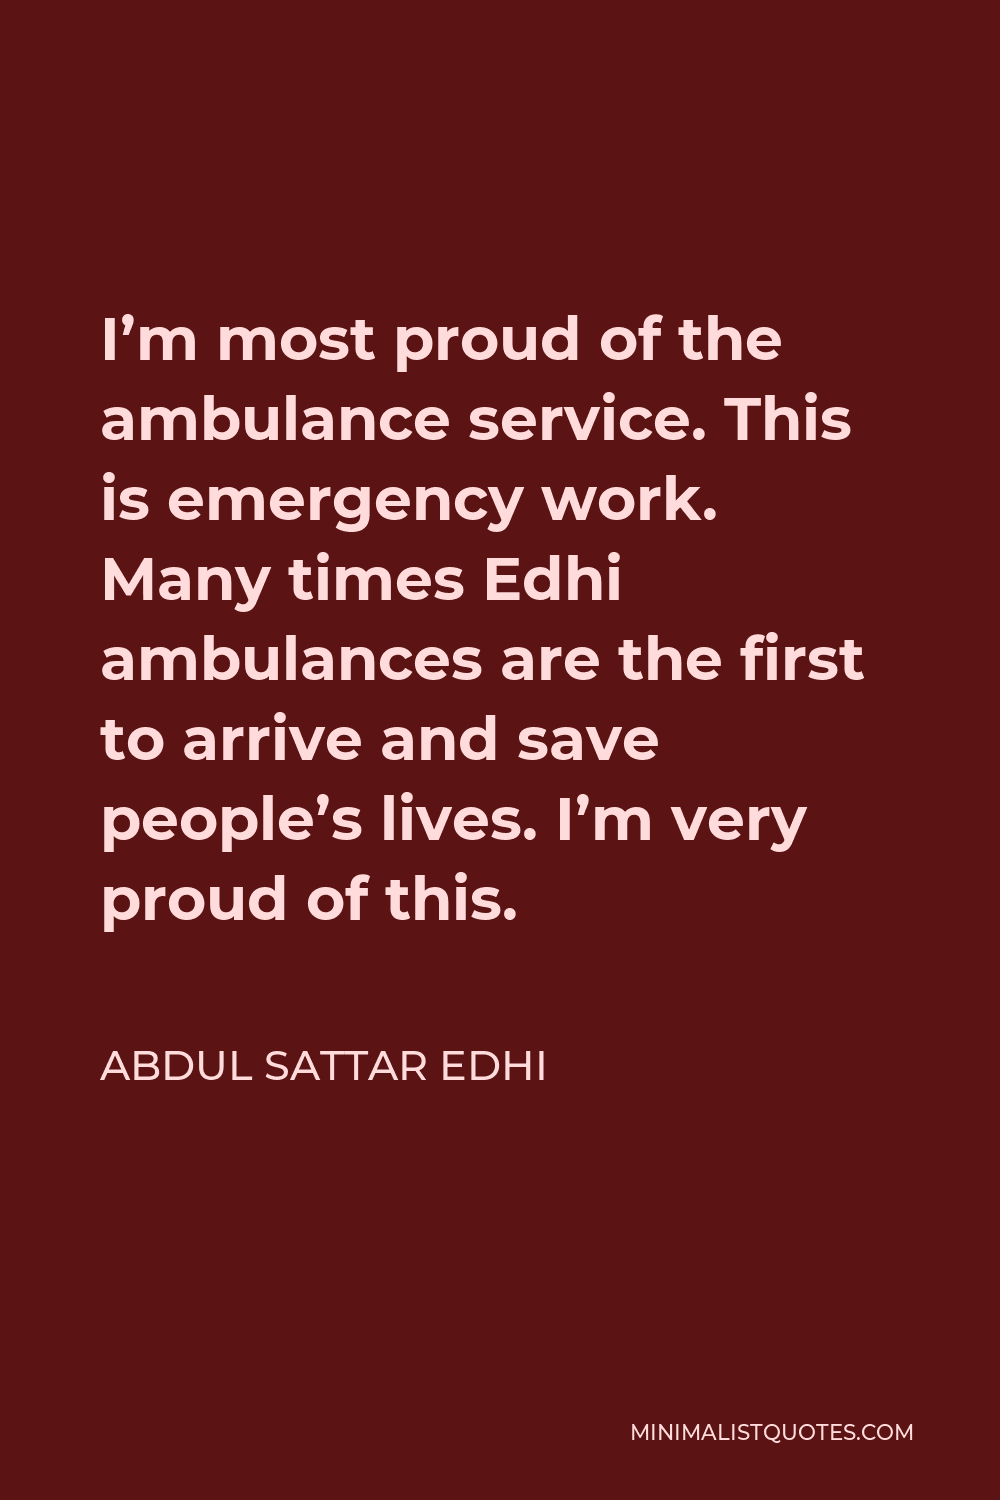 Abdul Sattar Edhi Quote - I’m most proud of the ambulance service. This is emergency work. Many times Edhi ambulances are the first to arrive and save people’s lives. I’m very proud of this.